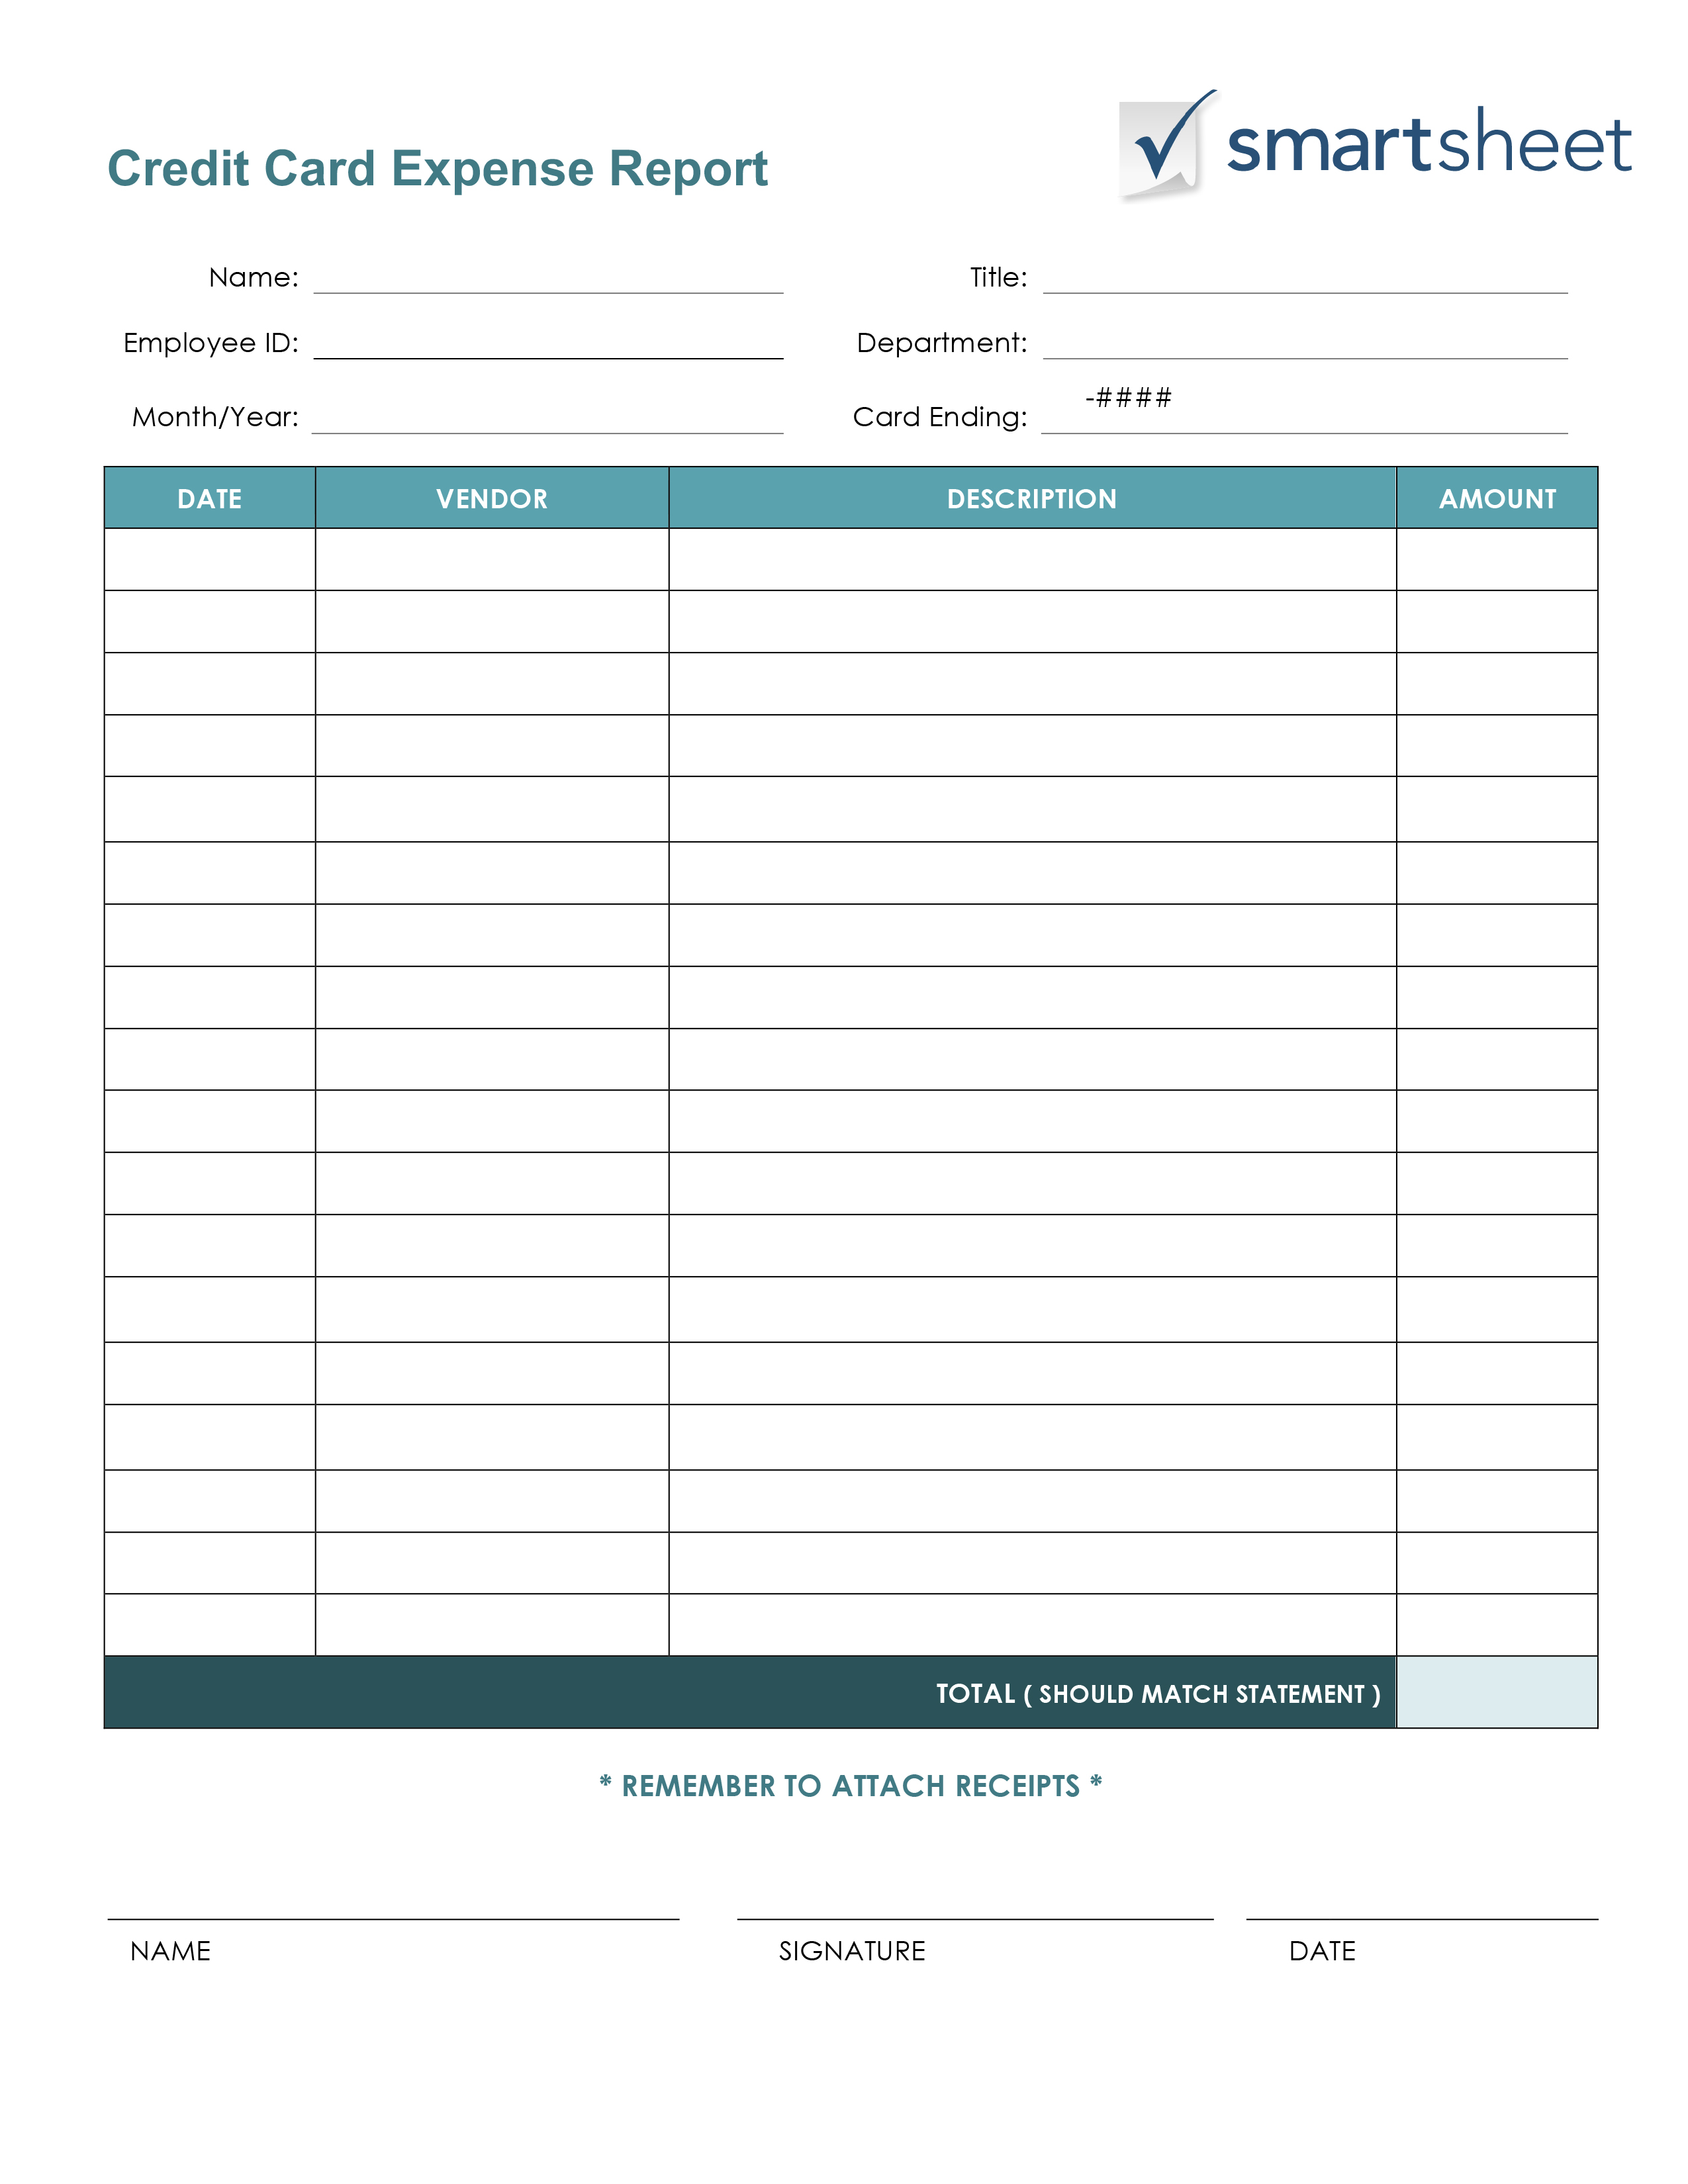 Business expenses template ic primary furthermore – muboo.info